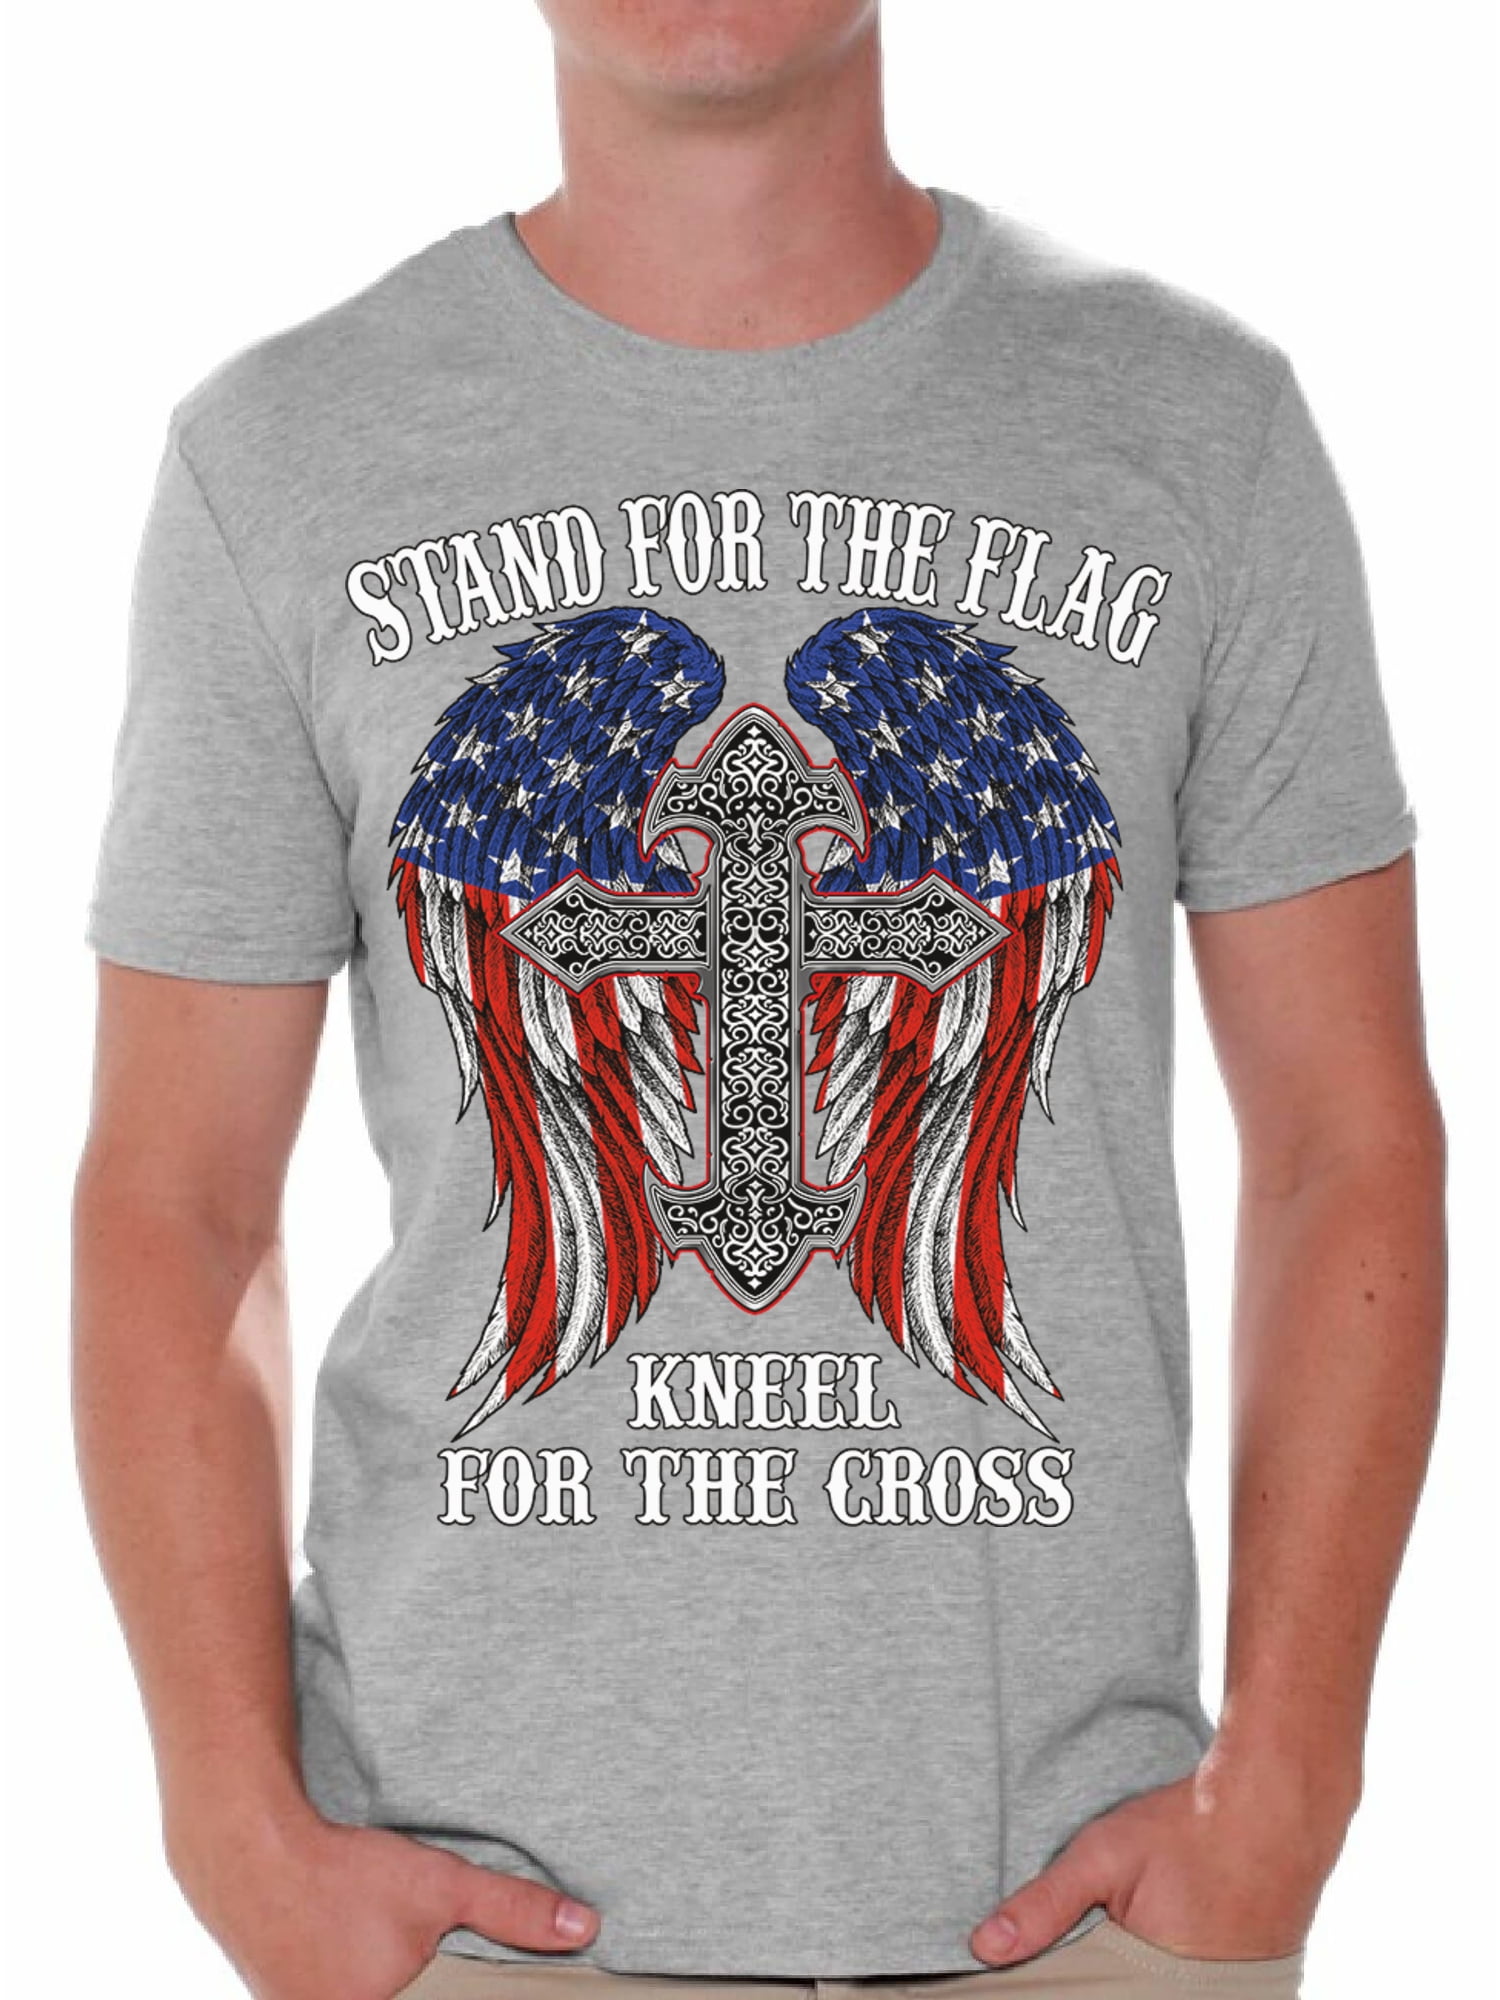 American Pride & Support for Veterans Distressed USA Flag Short Sleeve Unisex T Shirt National Anthem and Patriotism Shirt Love America